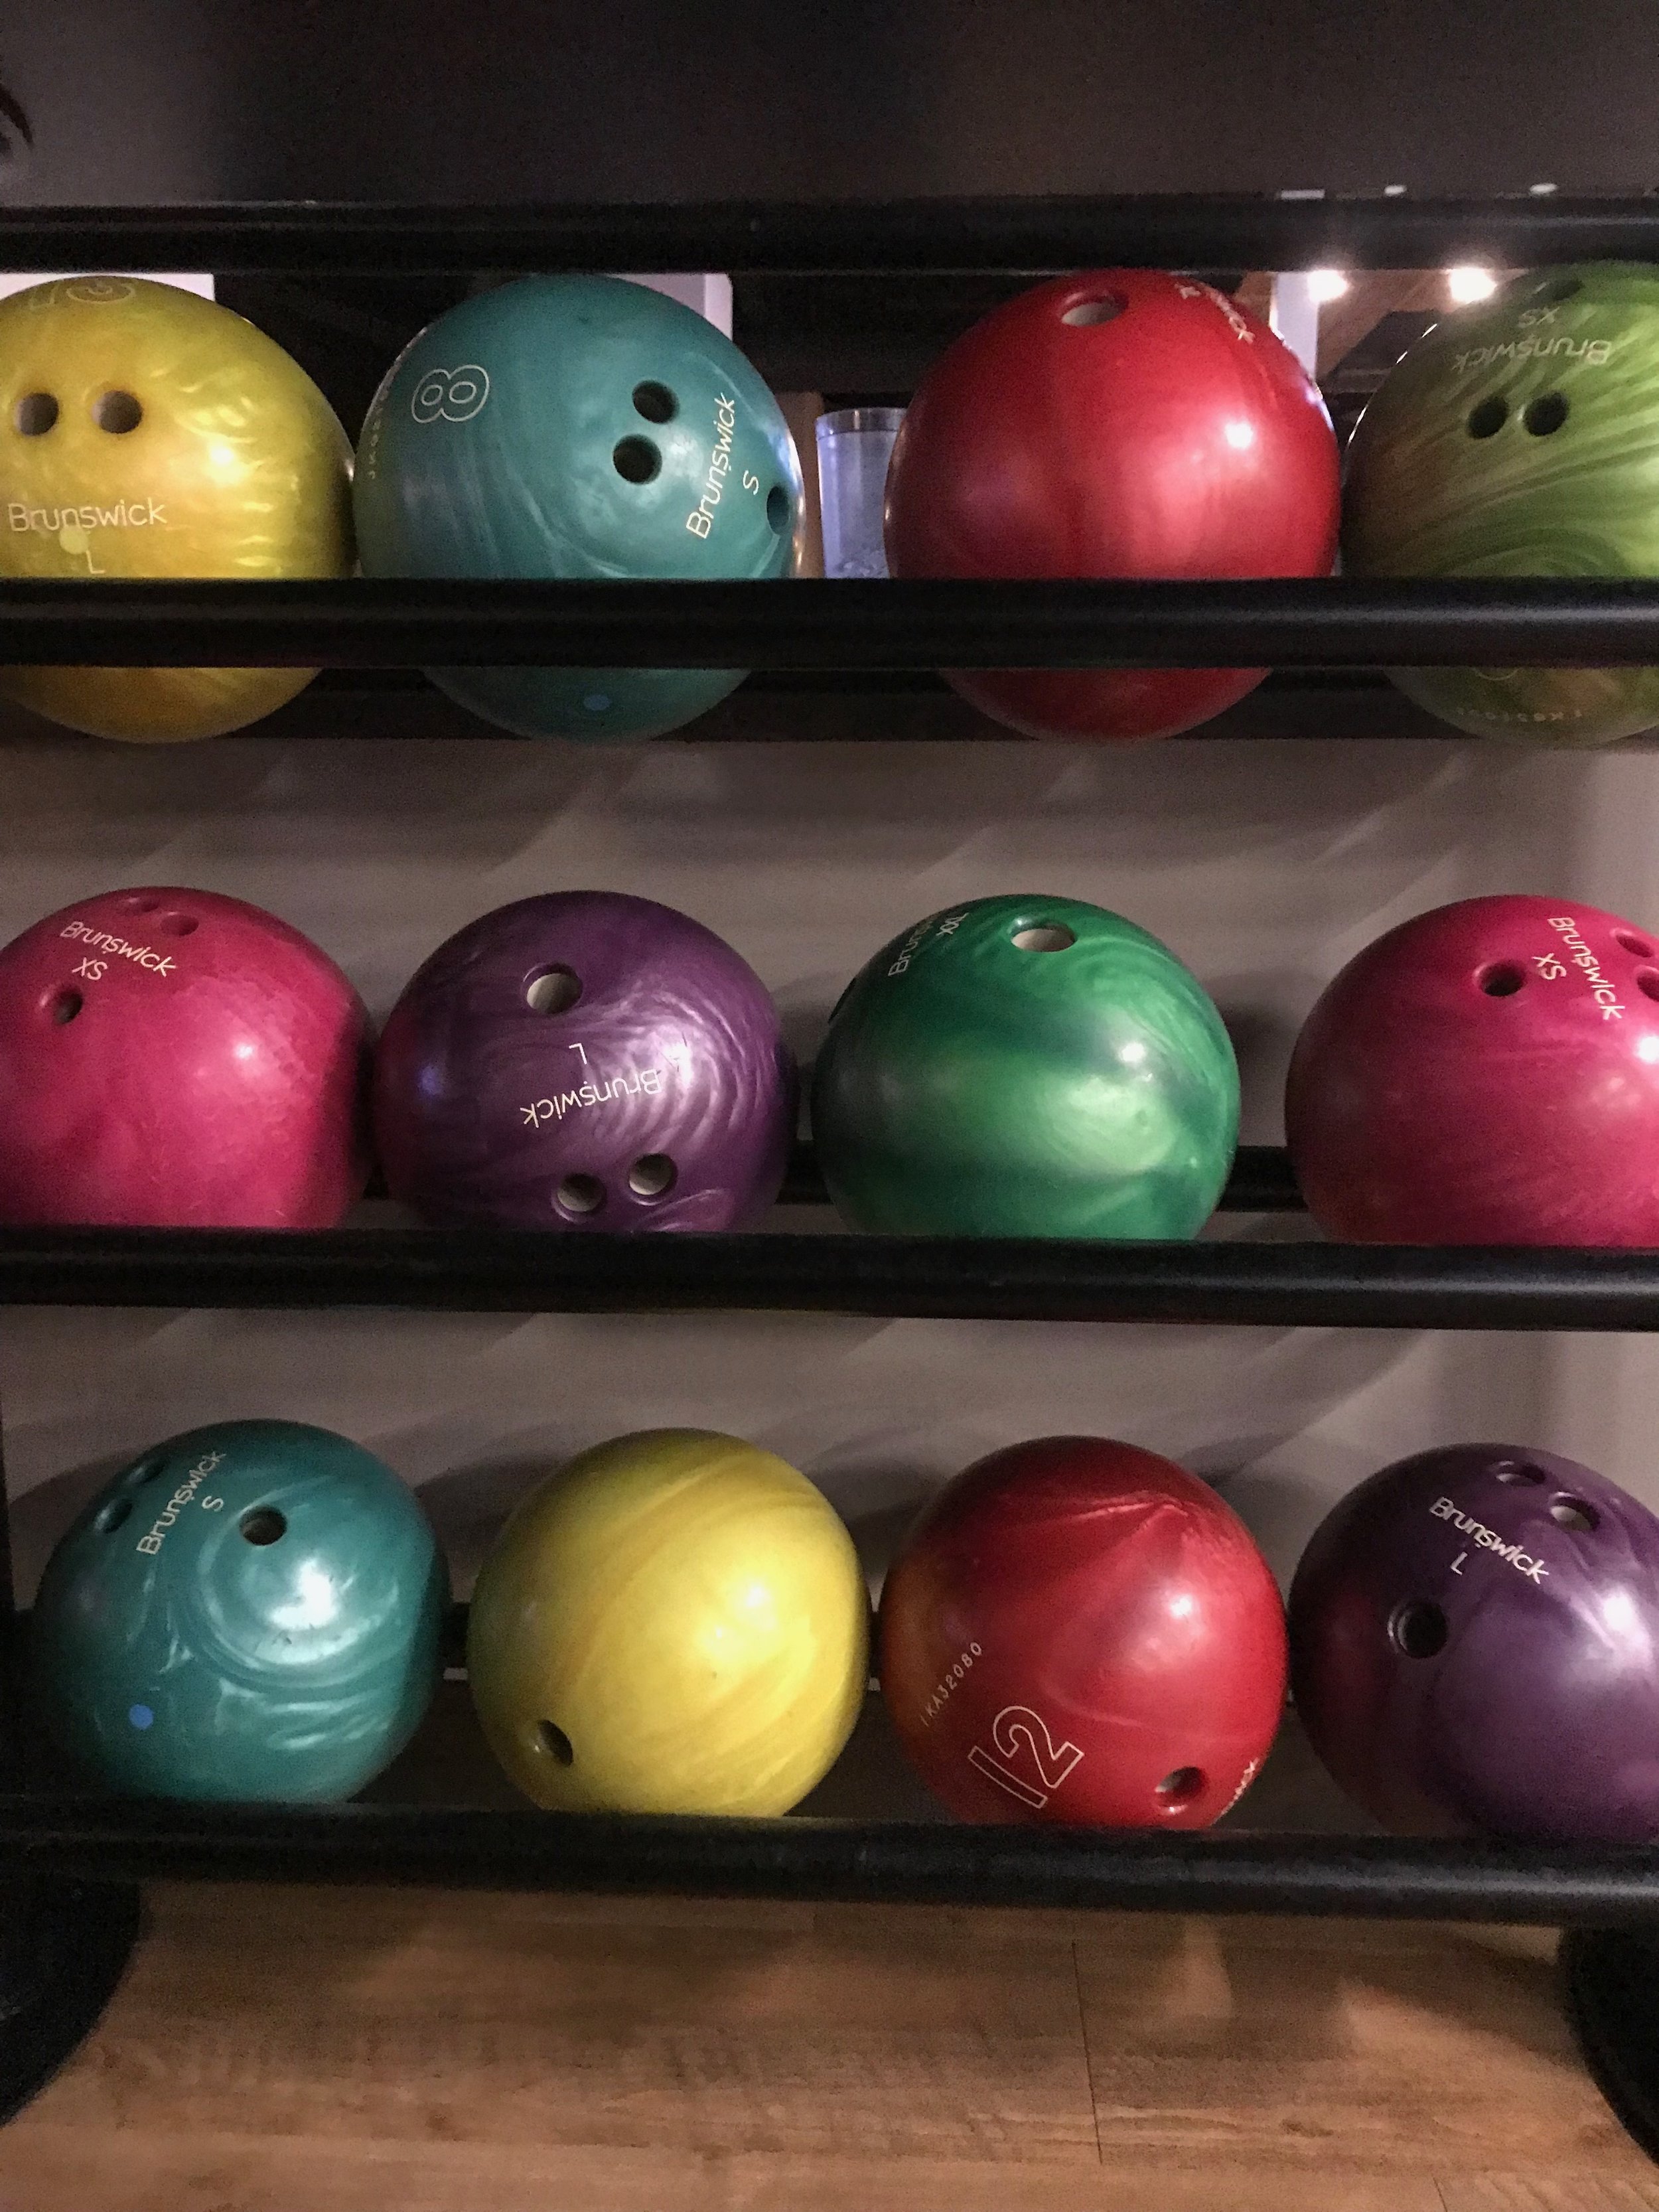  must dos in southern Maine - Garden Street Bowl 